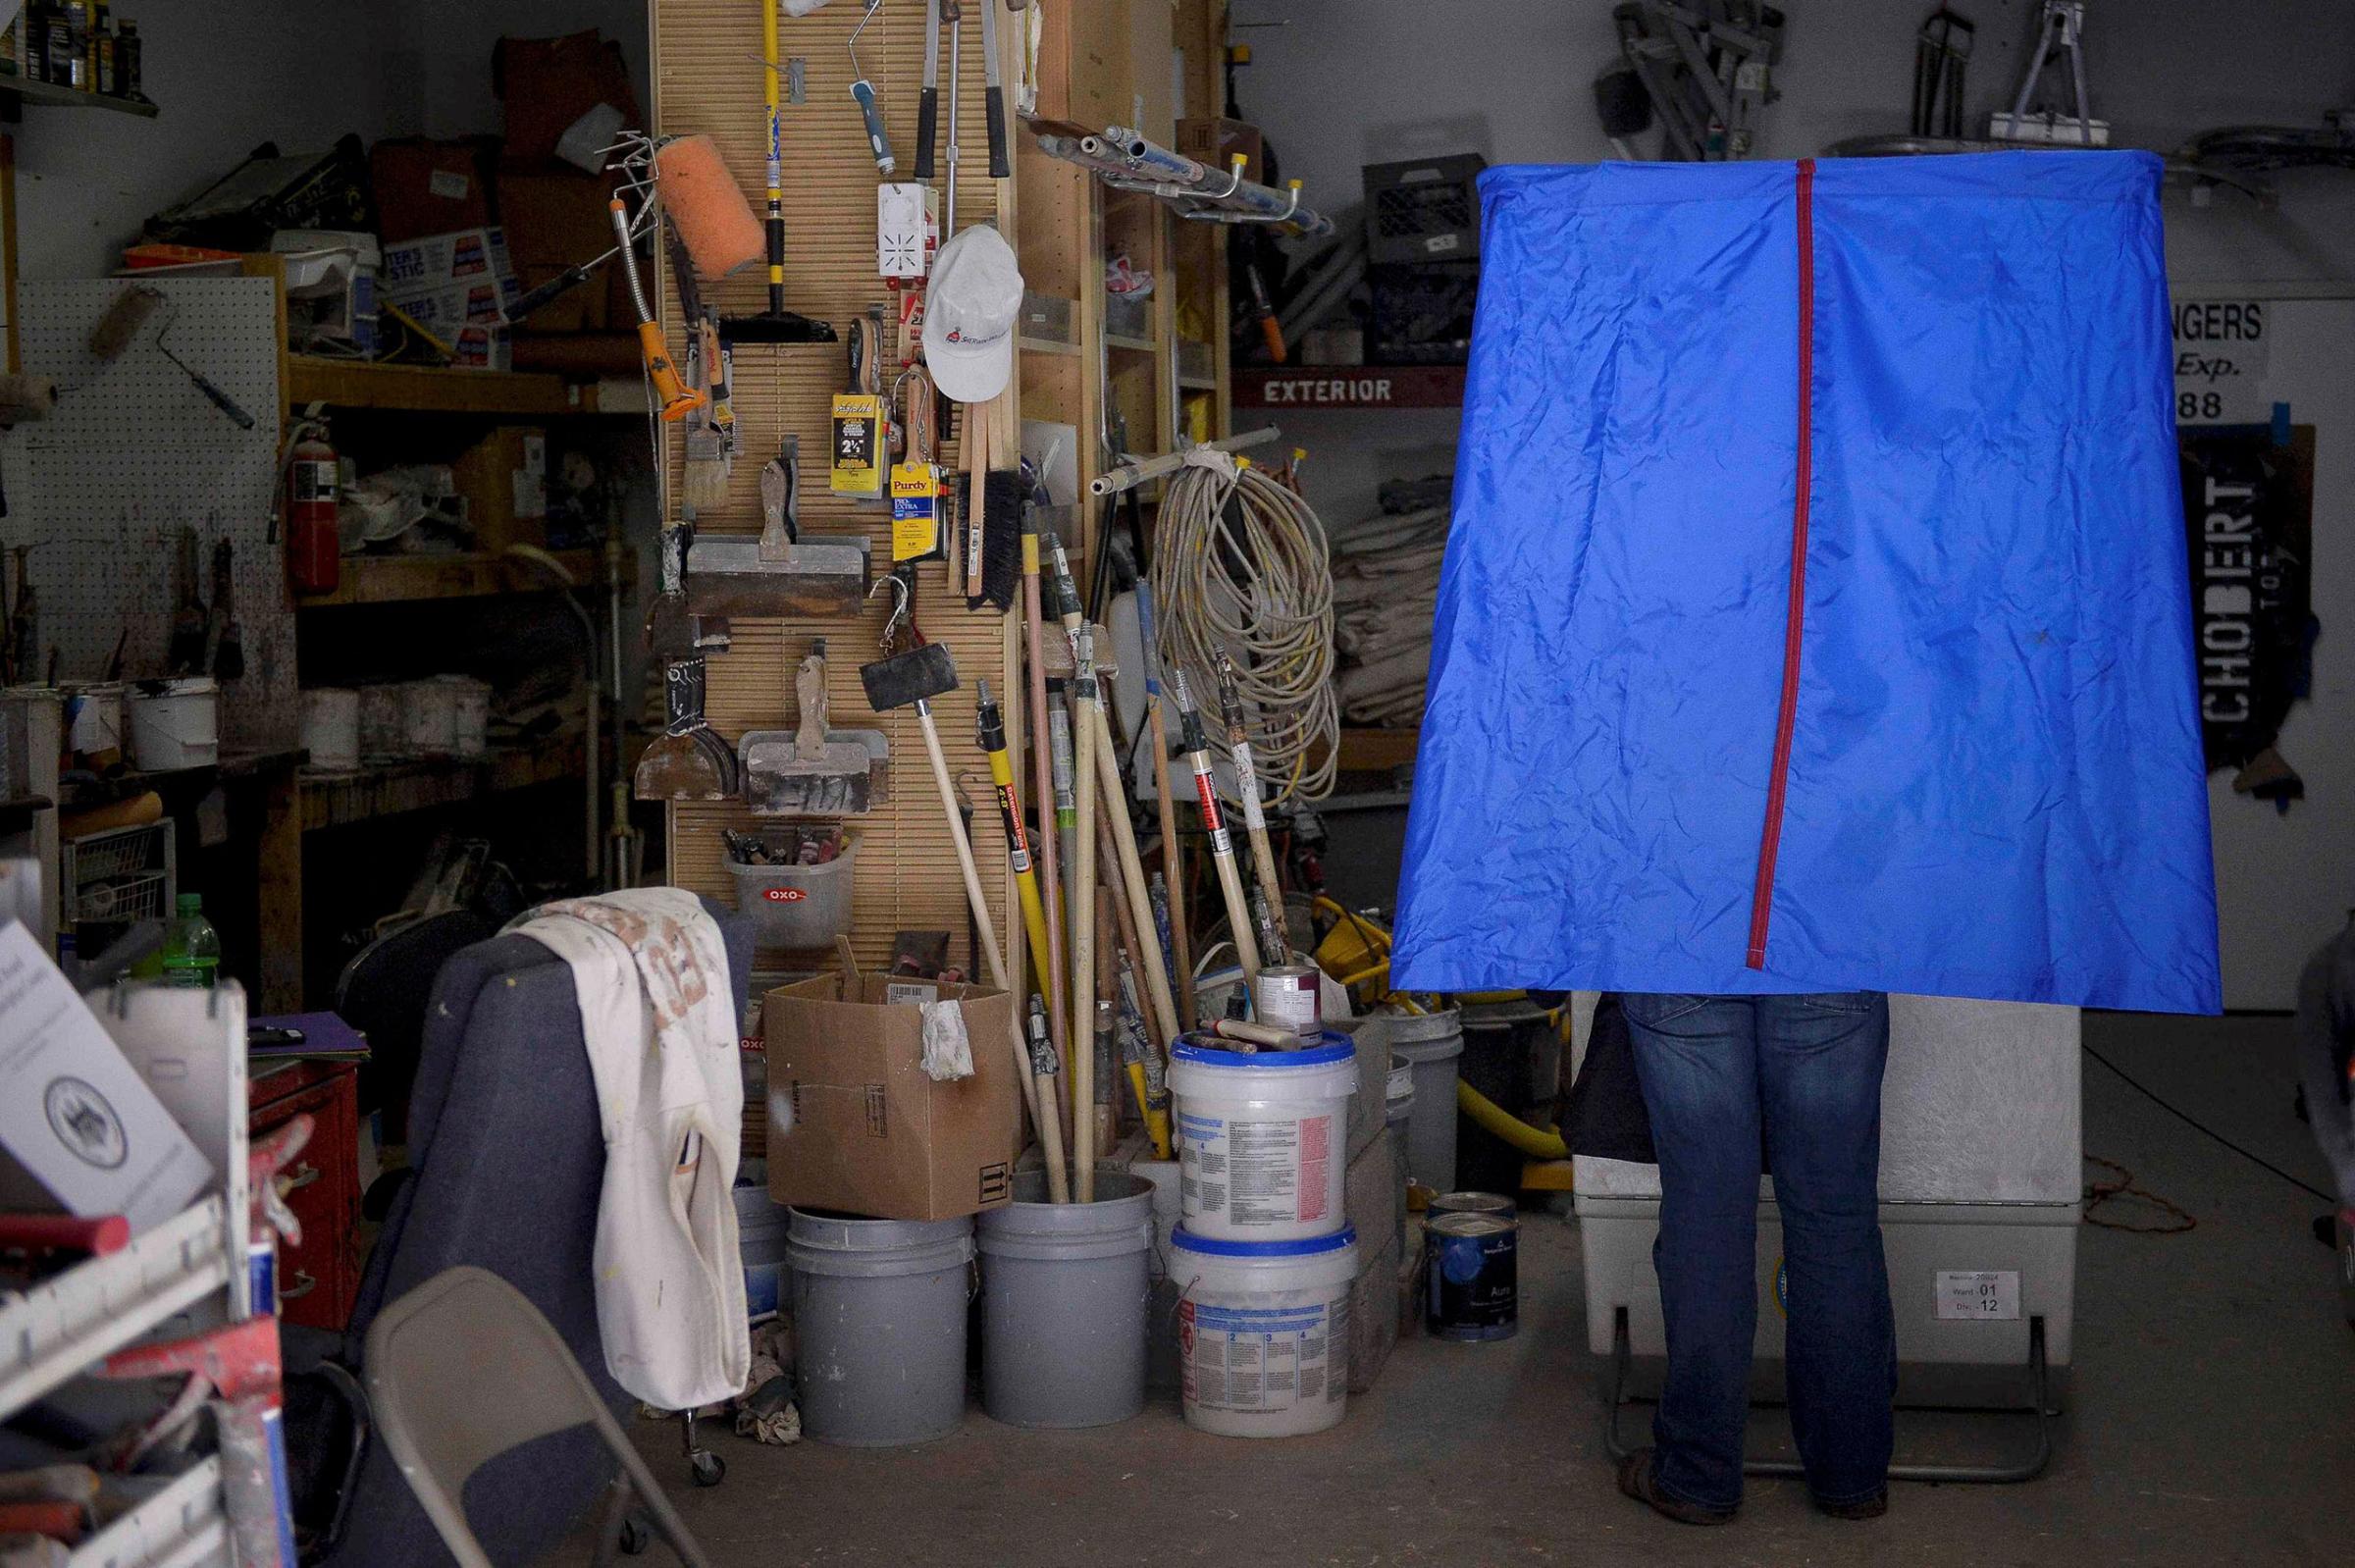 A voter casts his ballot inside the garage of Chobert Decorators during the U.S. presidential election in Philadelphia, Pennsylvania